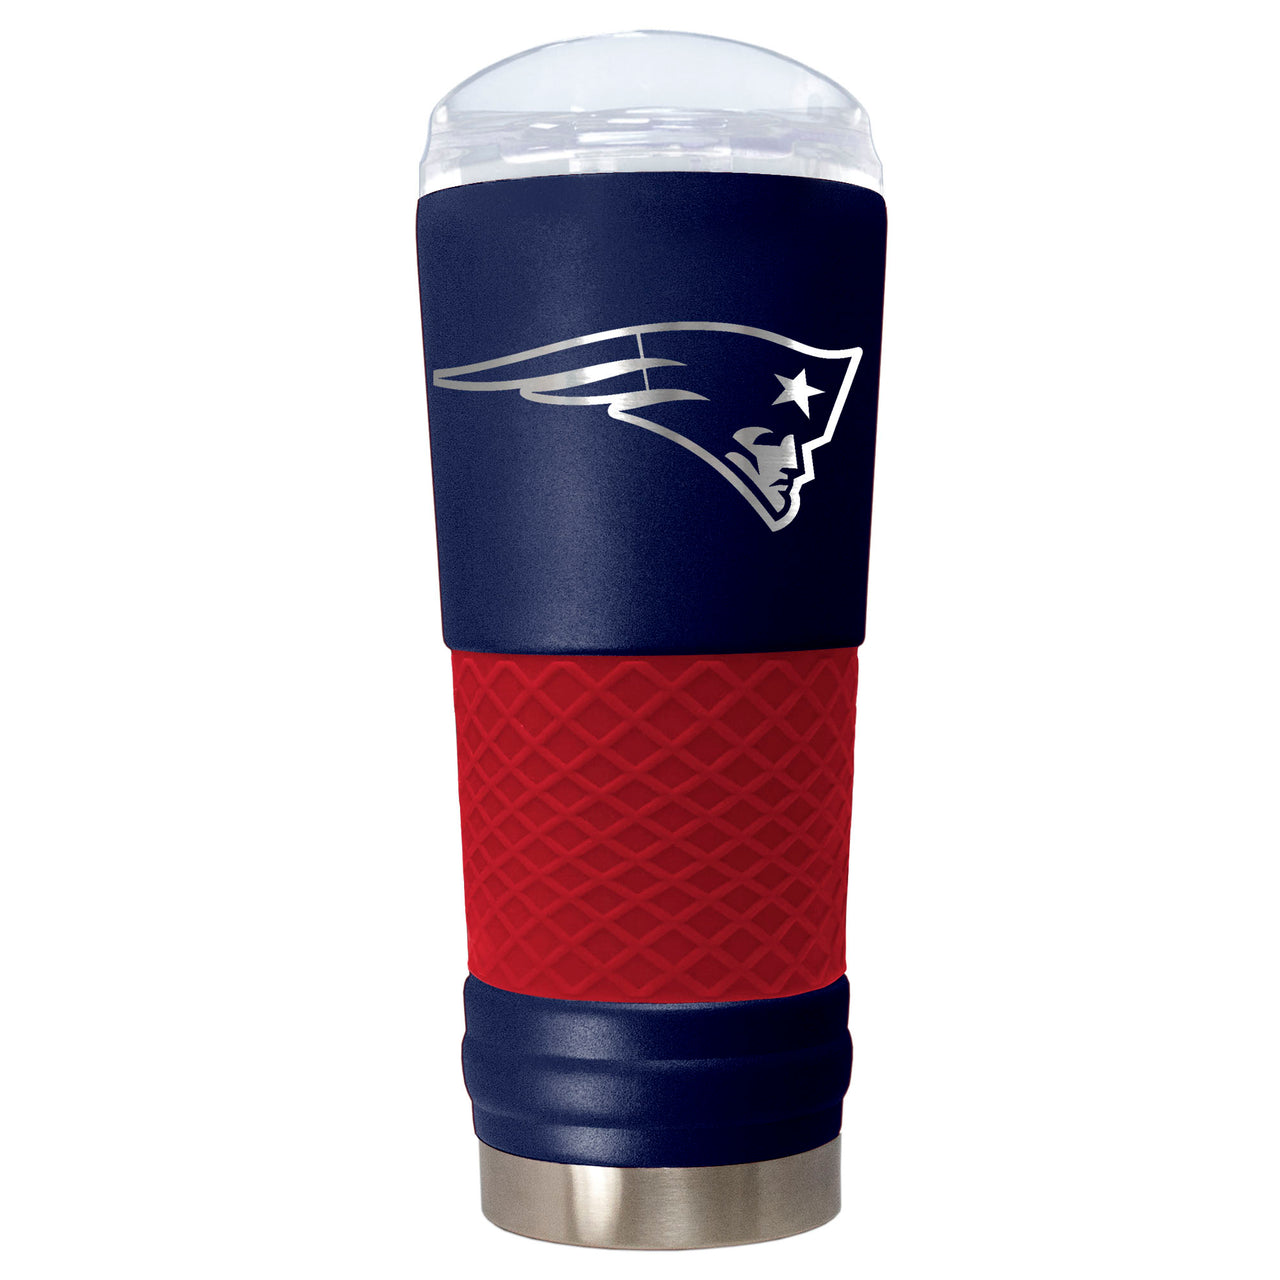 New England Patriots "The Draft" 24 oz. Stainless Steel Travel Tumbler - Dynasty Sports & Framing 